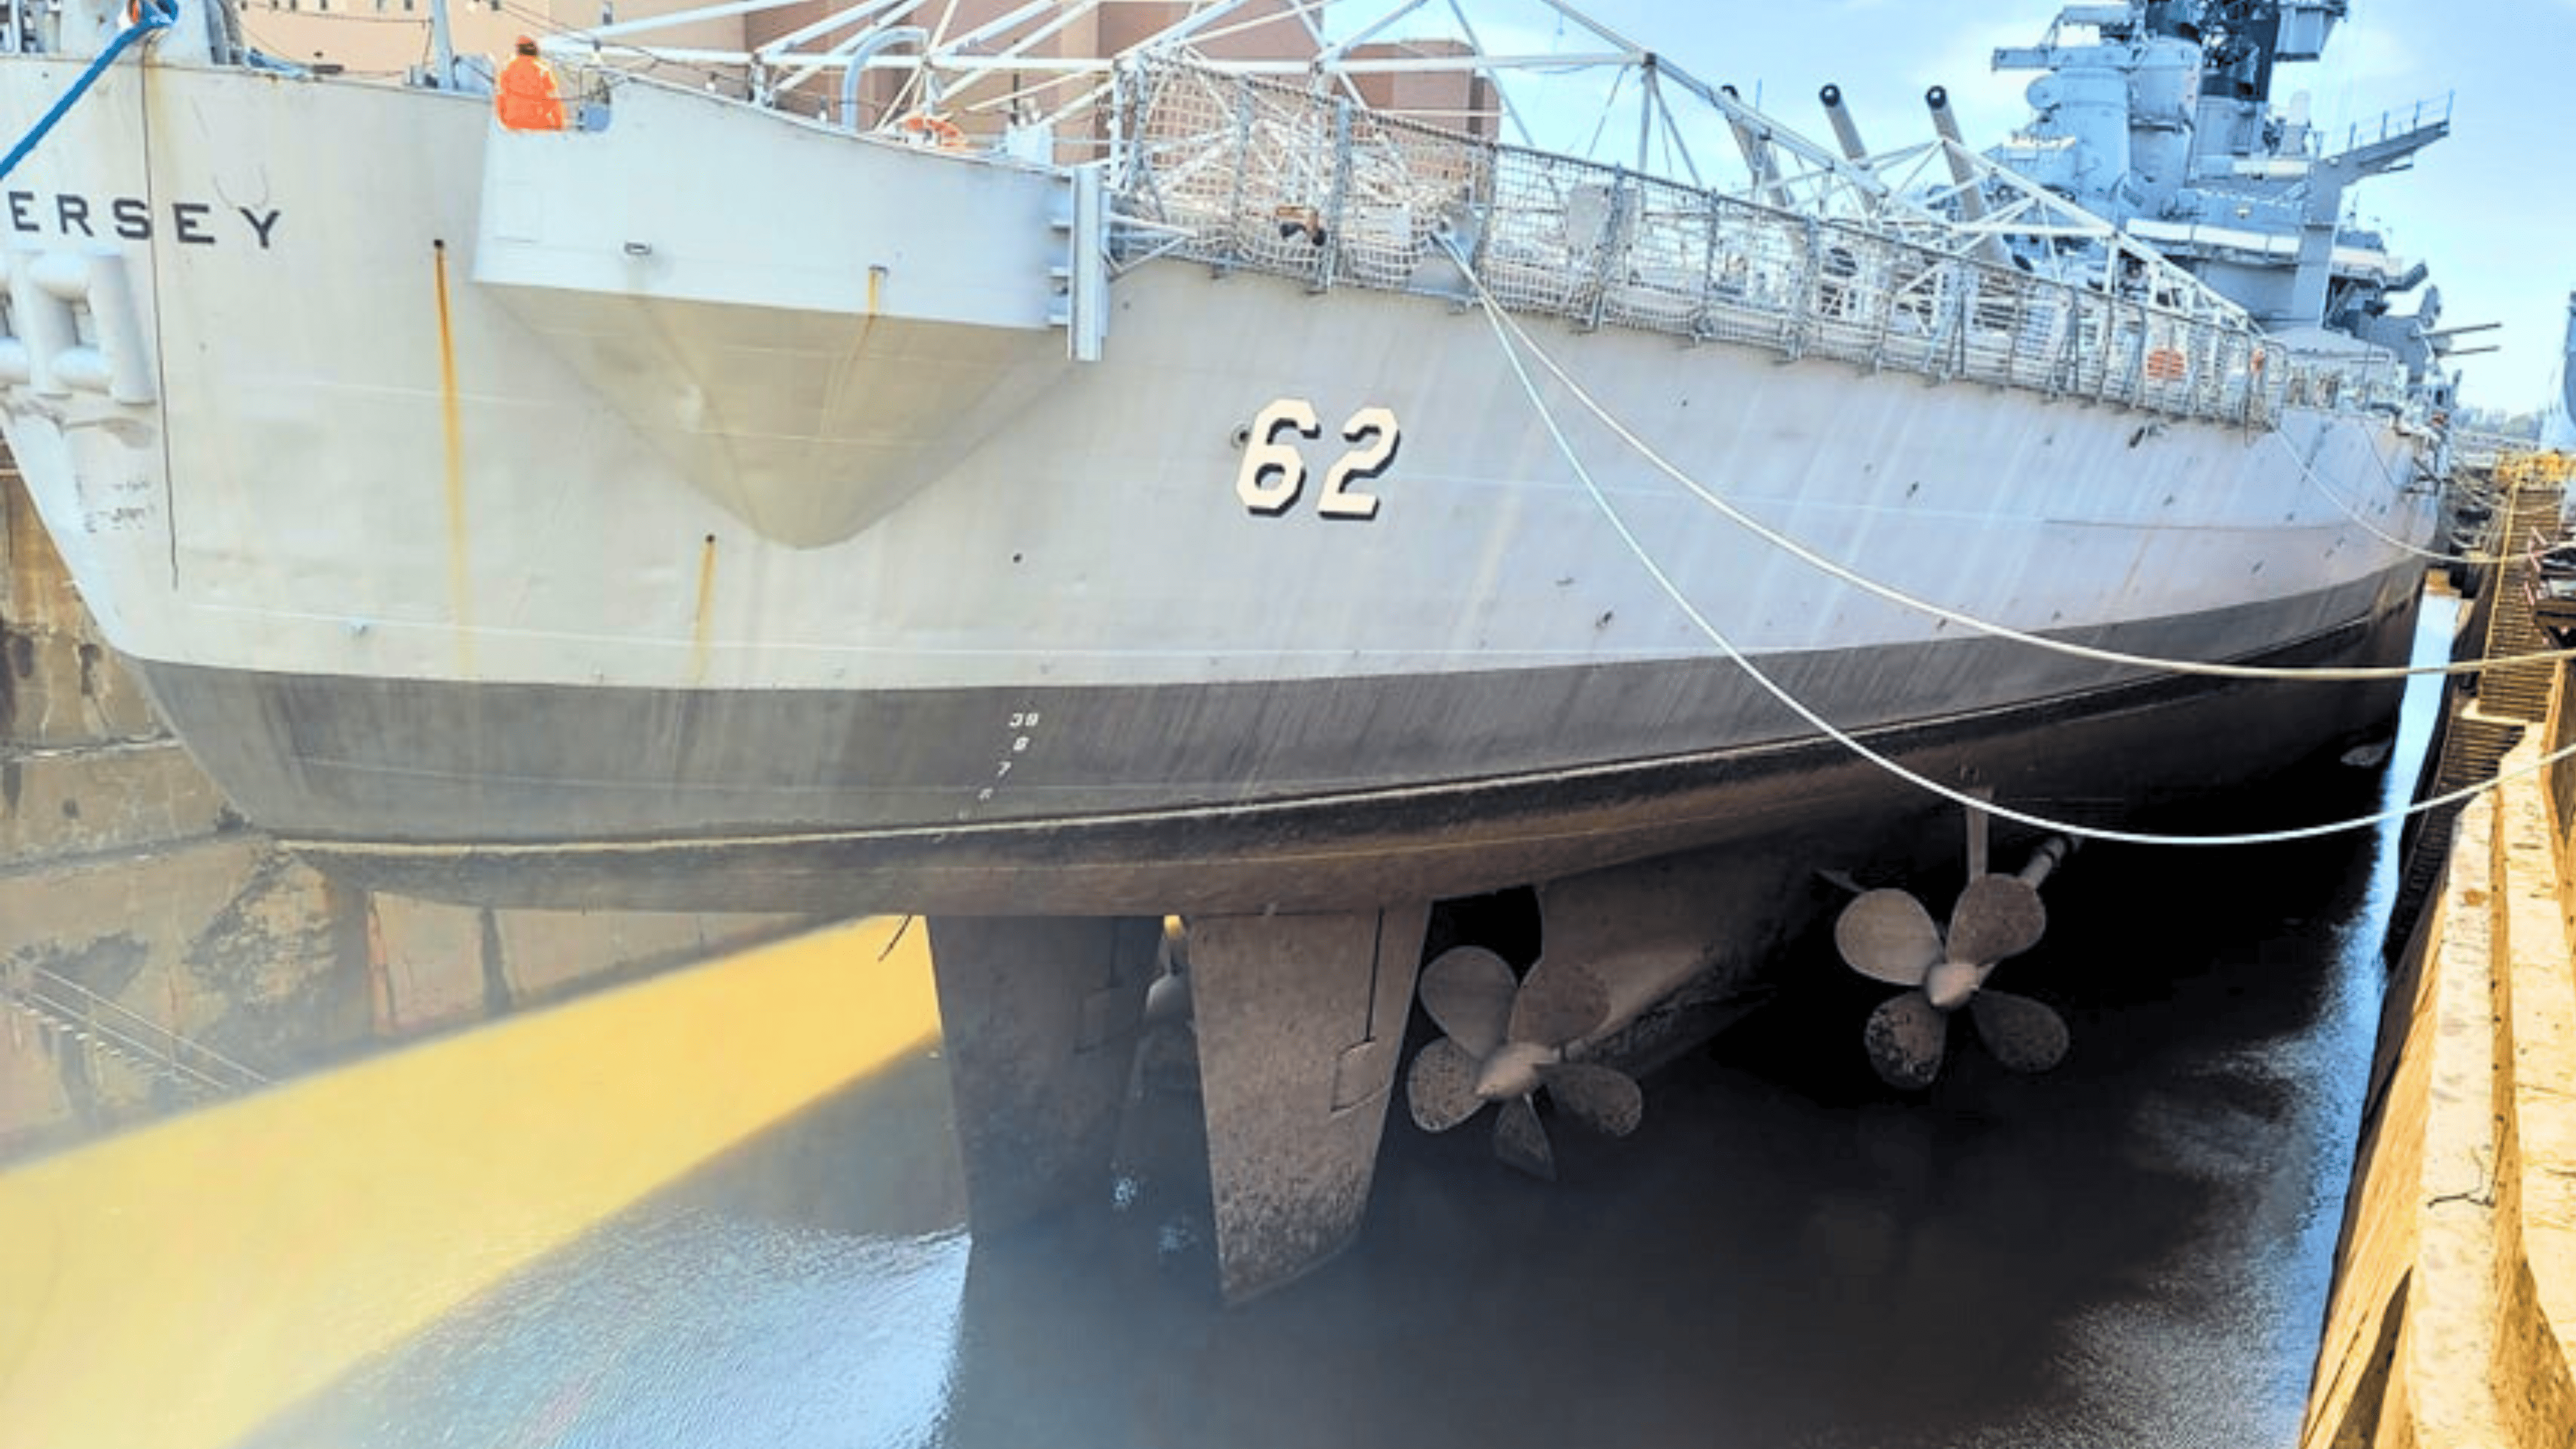 Battleship New Jersey Dry Dock Tours Are Available!